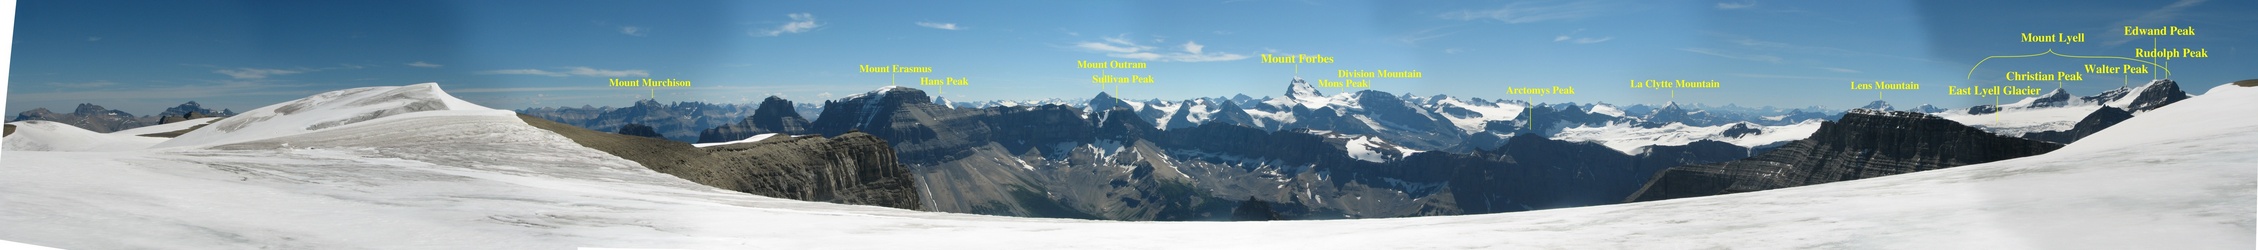 Taken 50 meters south of the confluence, at the top of the ridge looking south at centre, east on the left and west on the right.  Mount Forbes dominates the skyline.